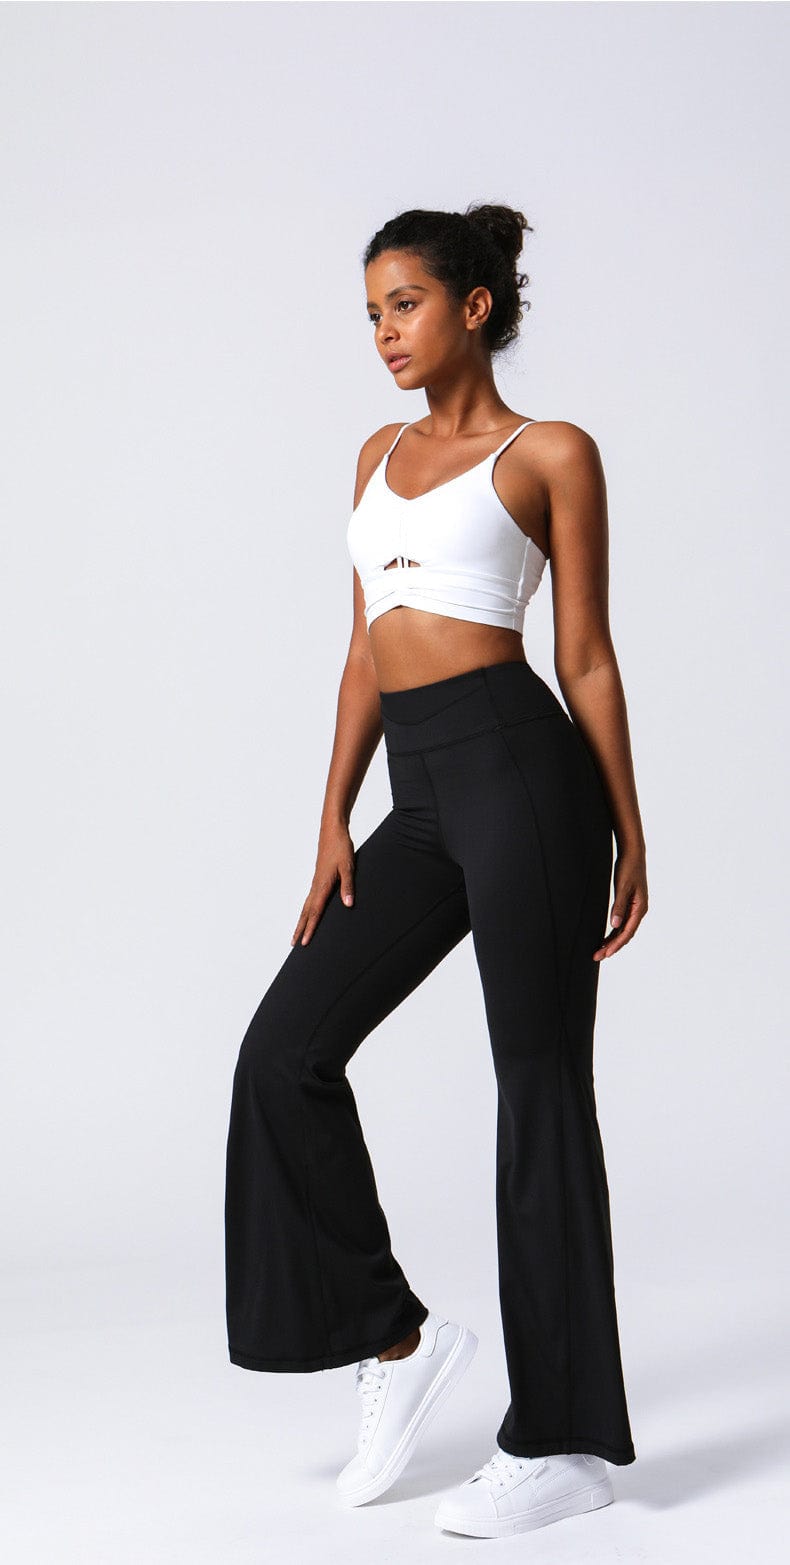 Soft and Comfortable High Waisted Flare Pants Legging with